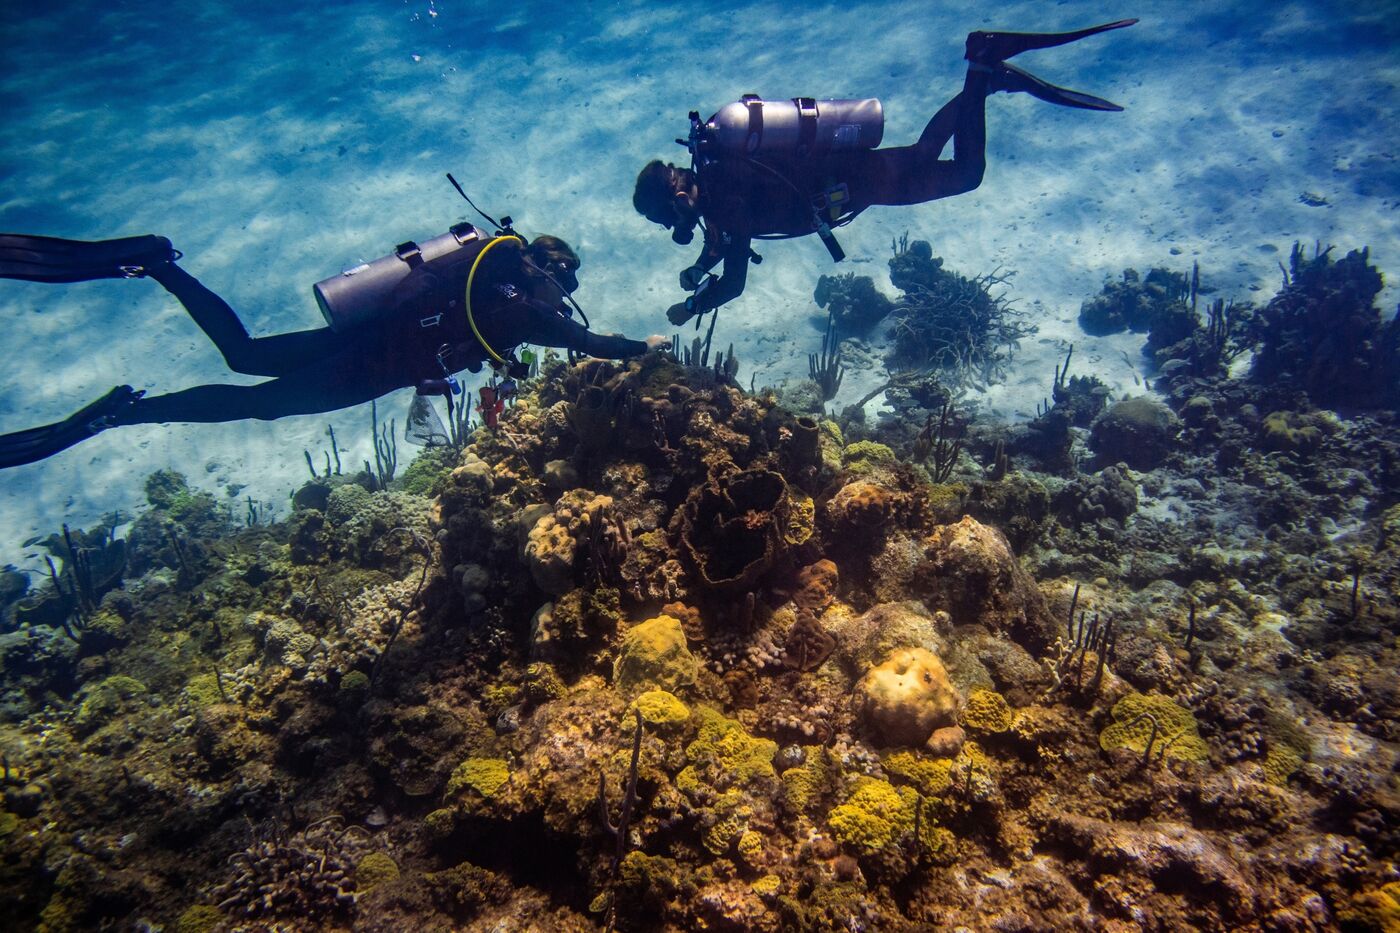 The world's coral reefs are dying. Shedd scientists in the Bahamas are searchig for a chance for their survival.